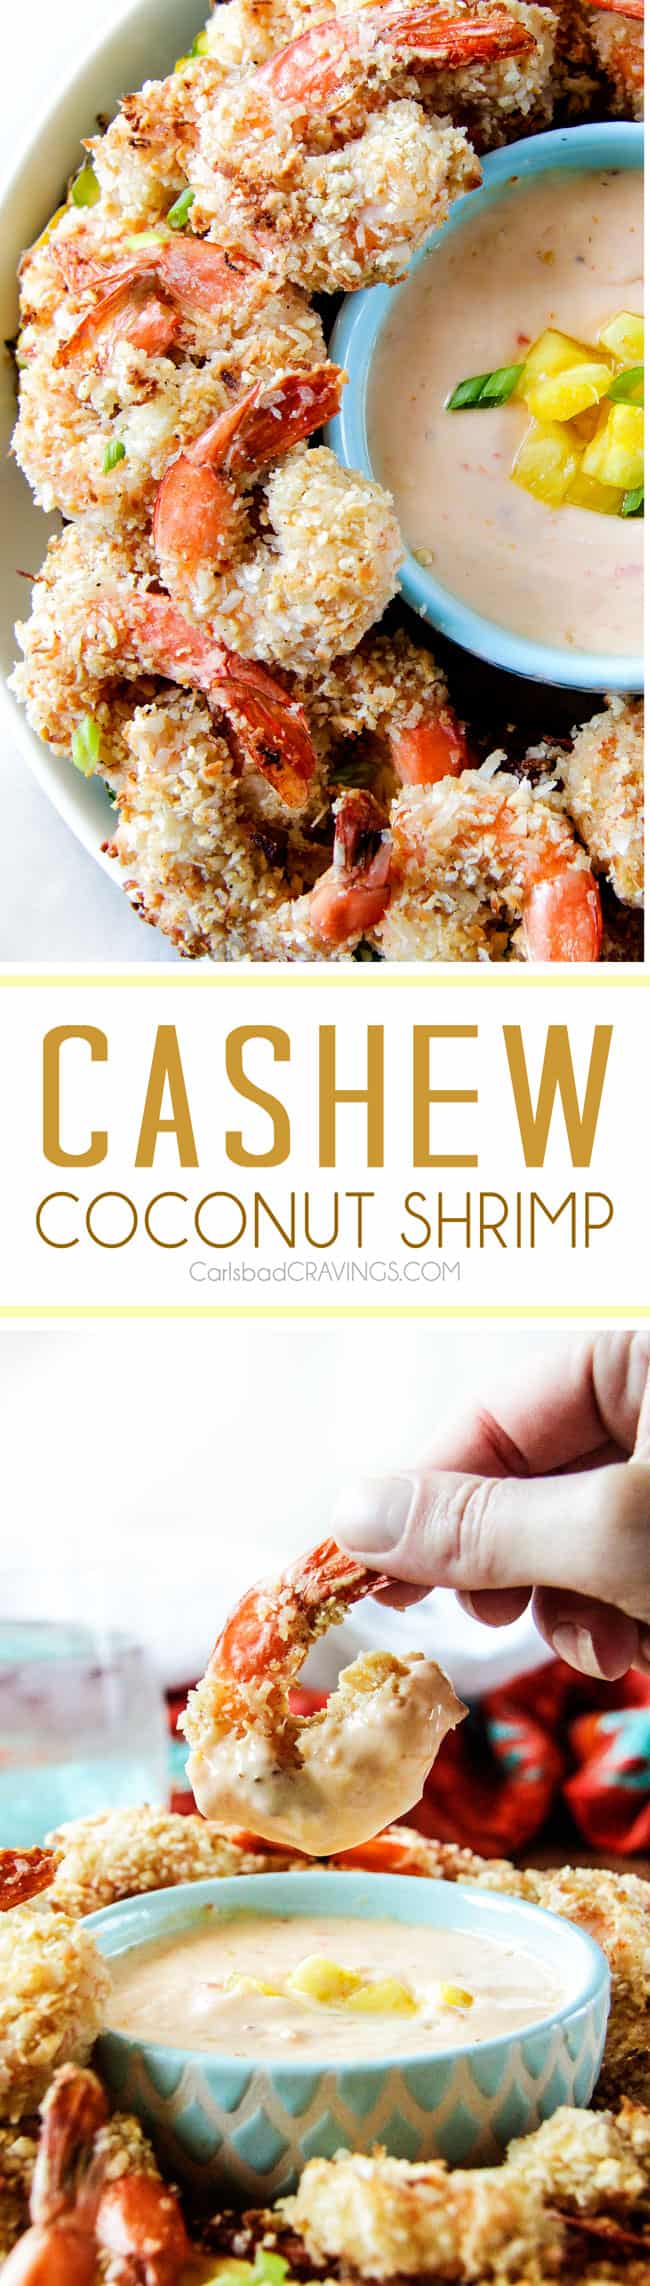 Baked crunchy, juicy Coconut Cashew Shrimp with Pineapple Sweet Chili Dip way better than takeout without the extra fat or cost!